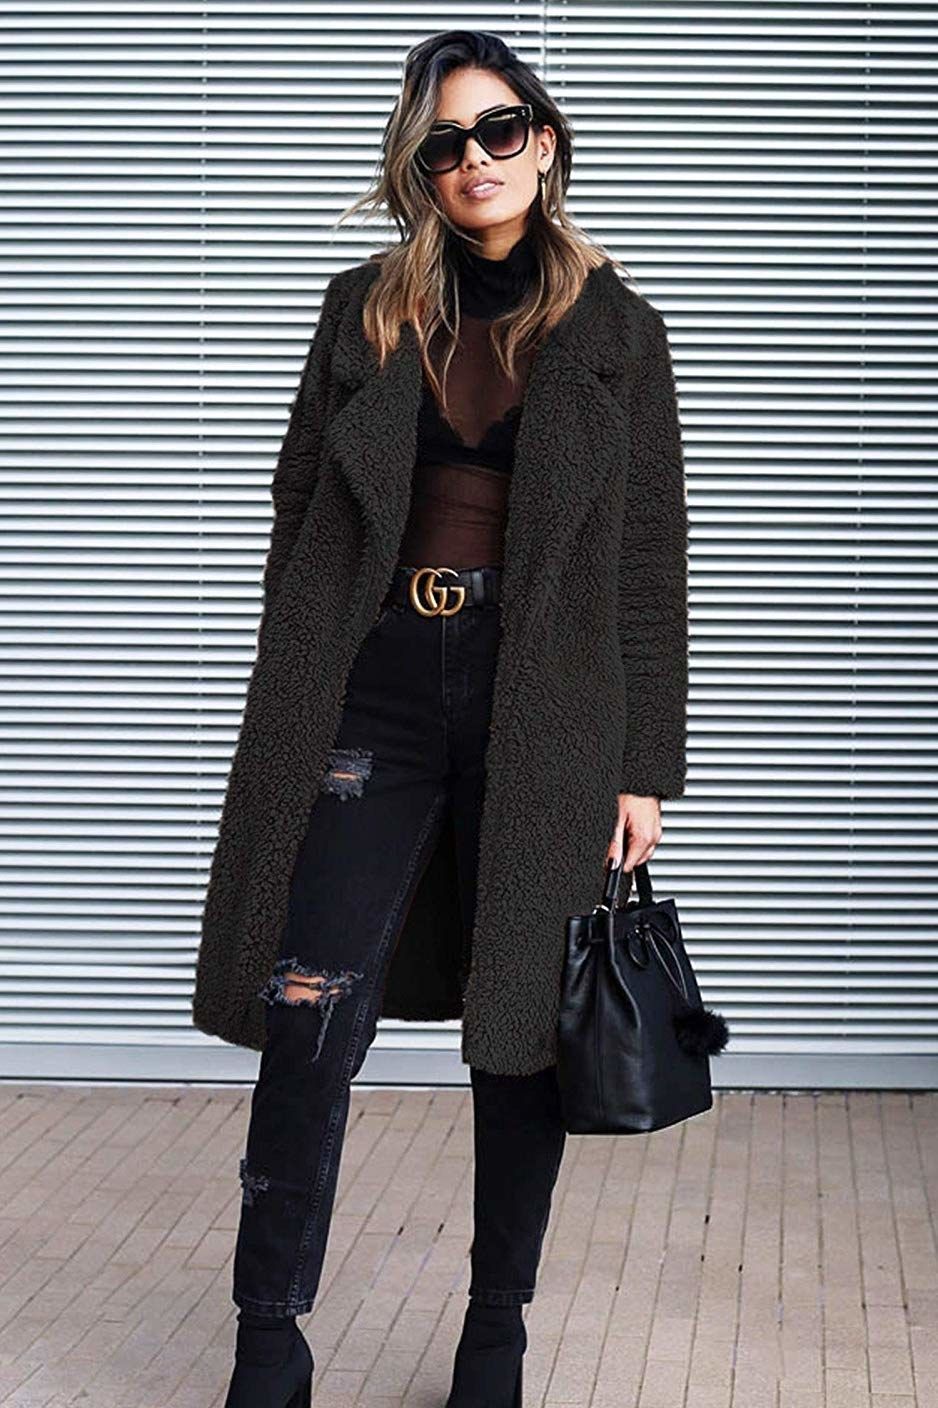 6 Stylish Outfits to Wear to Work When It's Cold AF